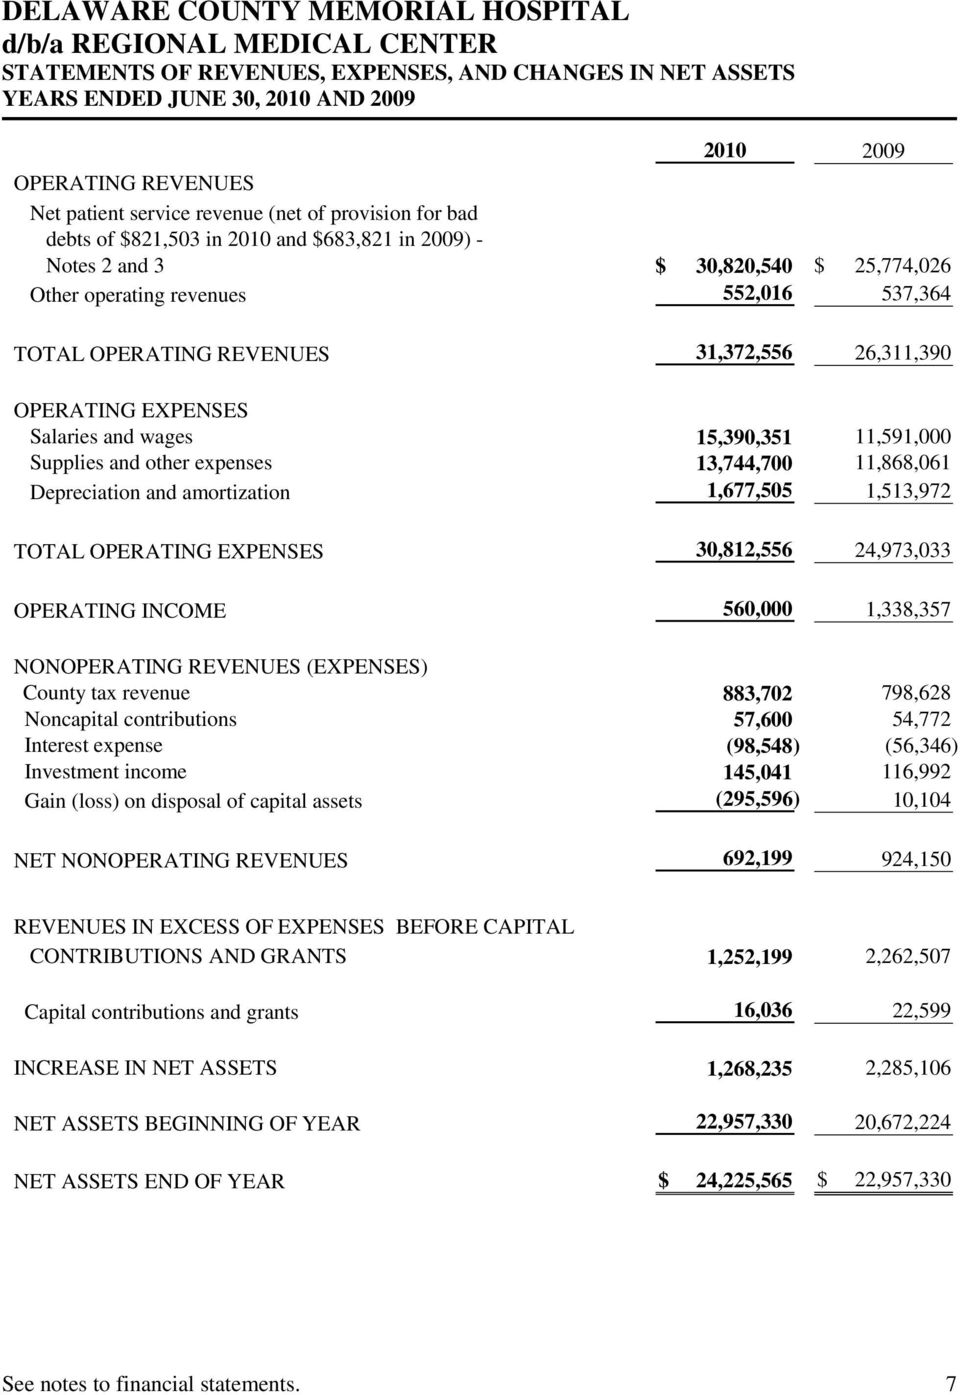 15,390,351 11,591,000 Supplies and other expenses 13,744,700 11,868,061 Depreciation and amortization 1,677,505 1,513,972 TOTAL OPERATING EXPENSES 30,812,556 24,973,033 OPERATING INCOME 560,000